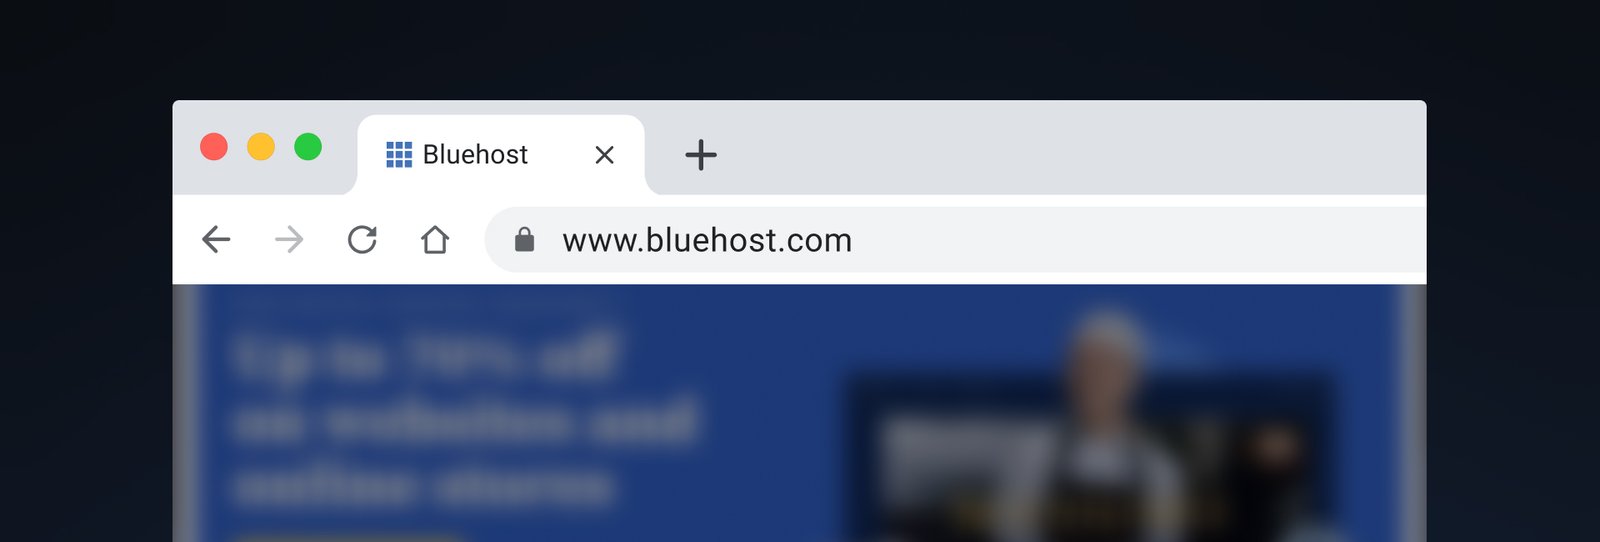 Go to Bluehost